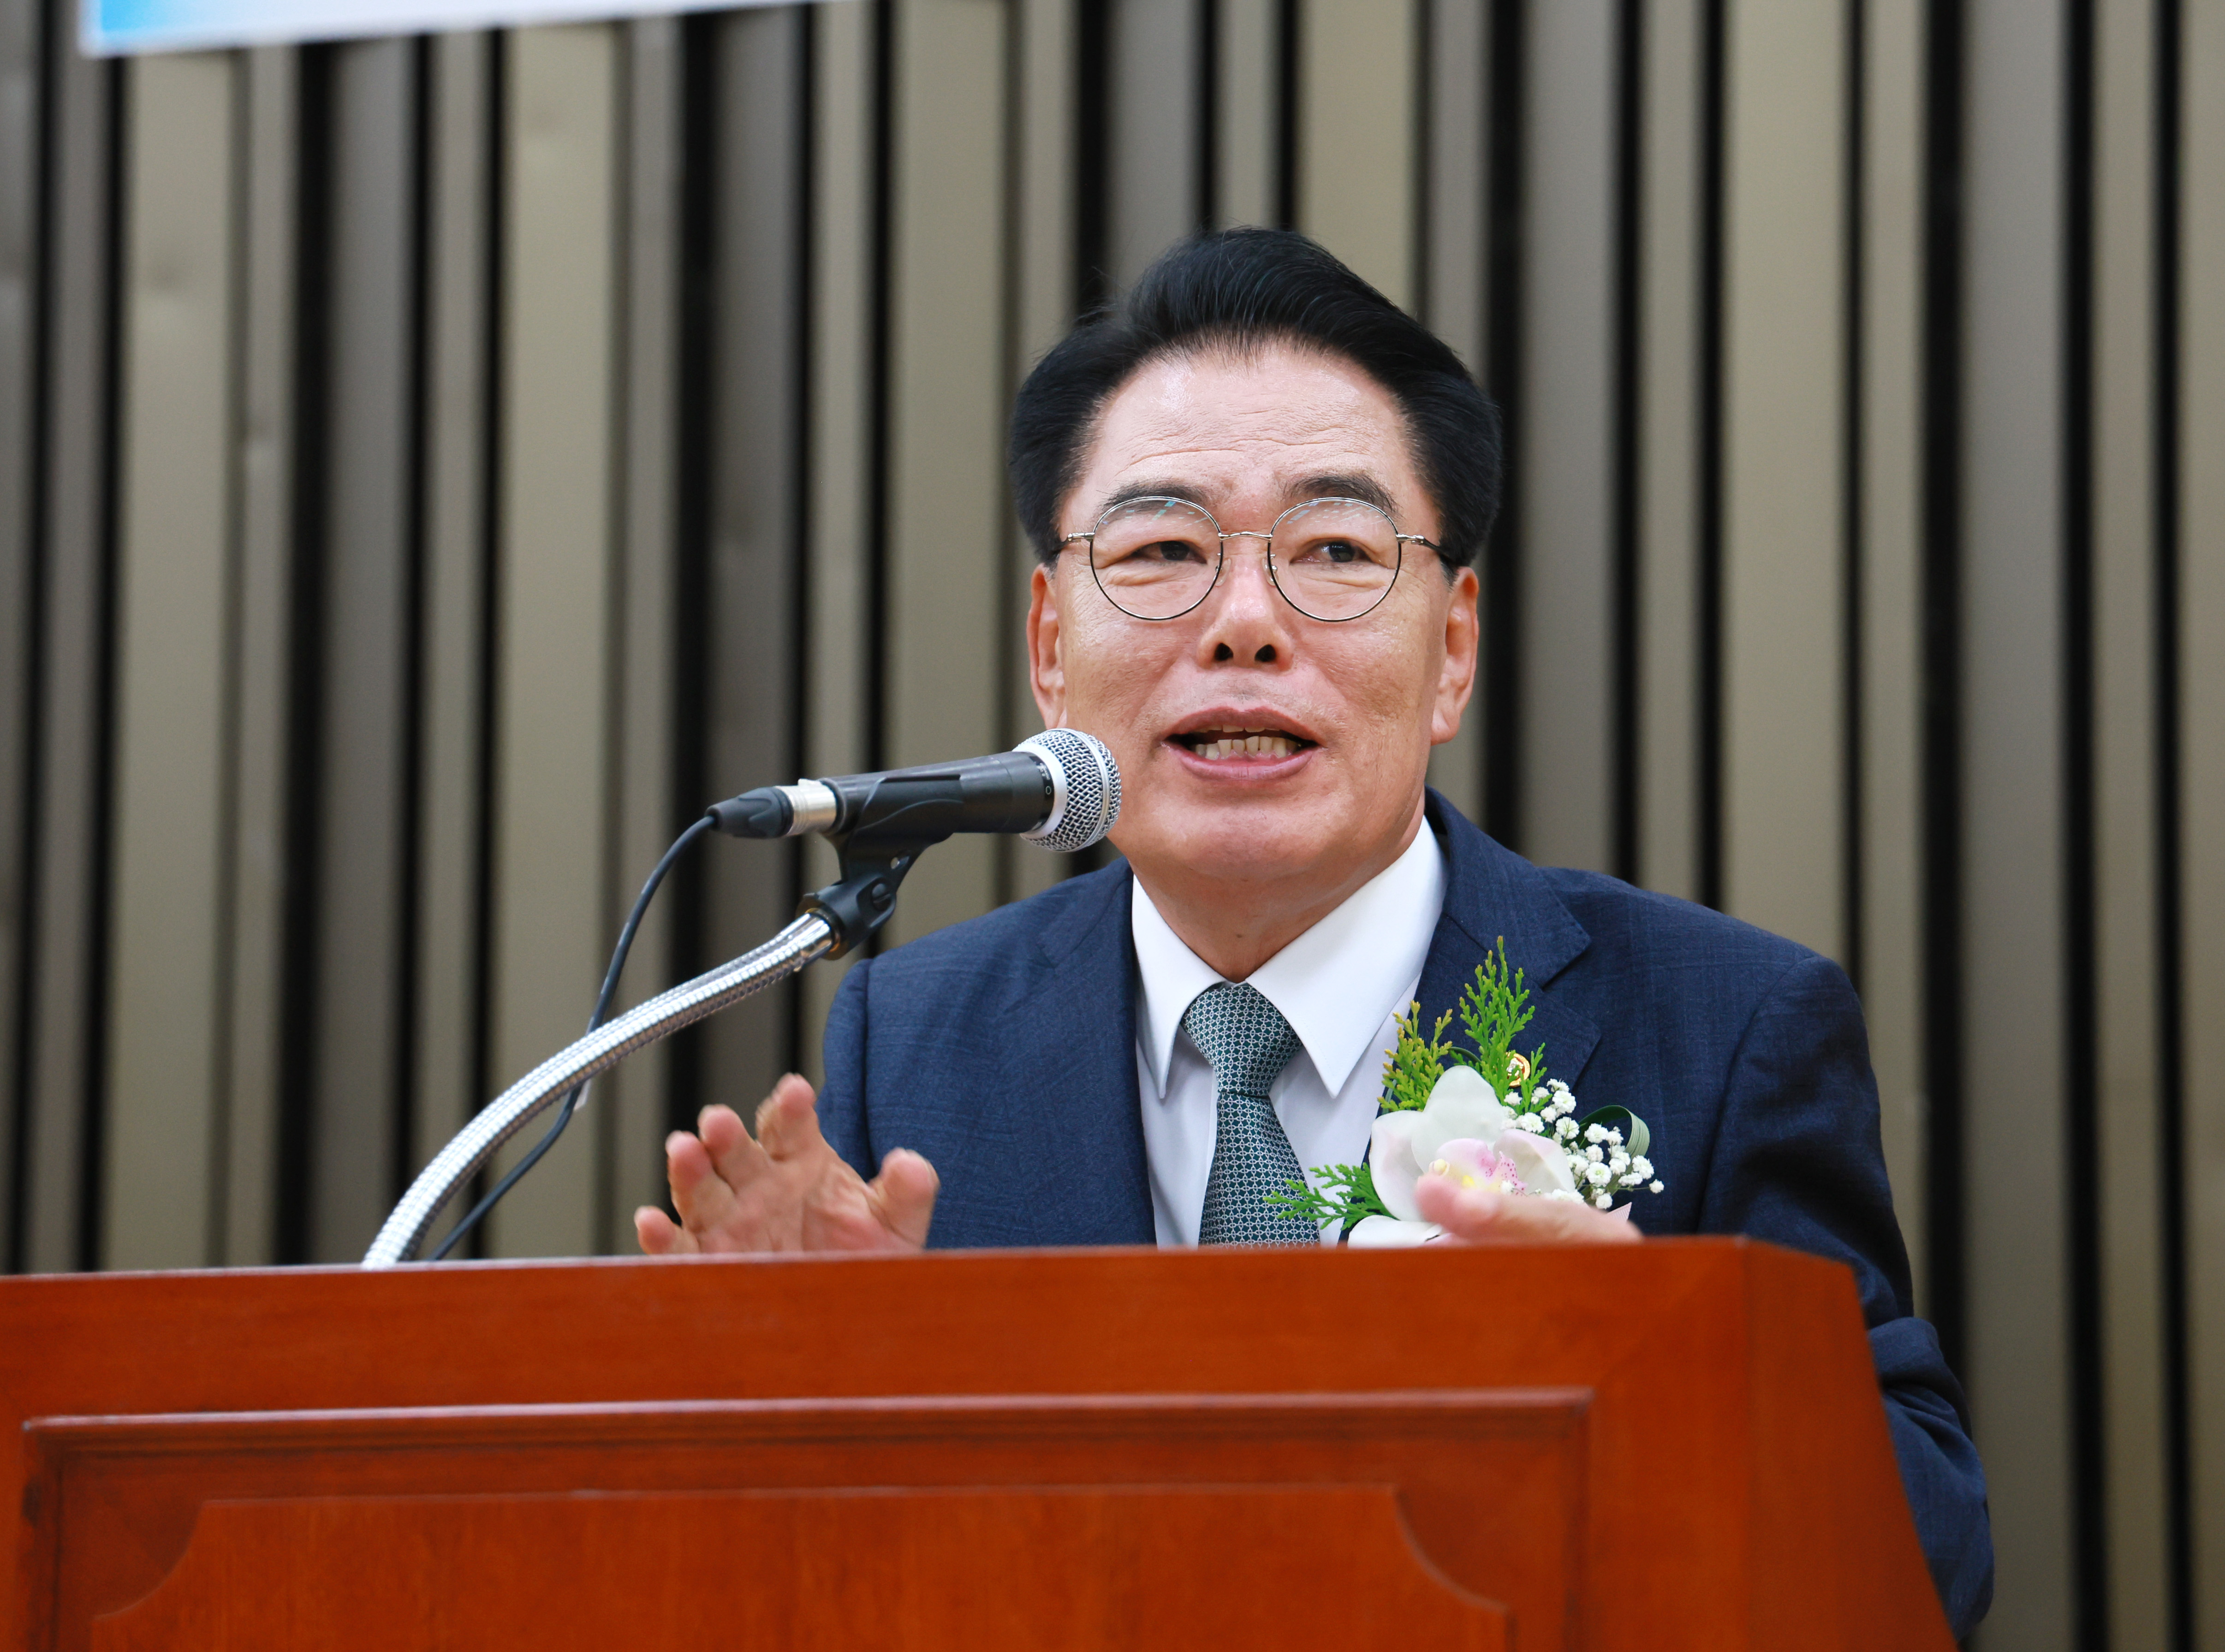 Inaugural Address of the 36th National Assembly Secretary General 관련사진 1 보기